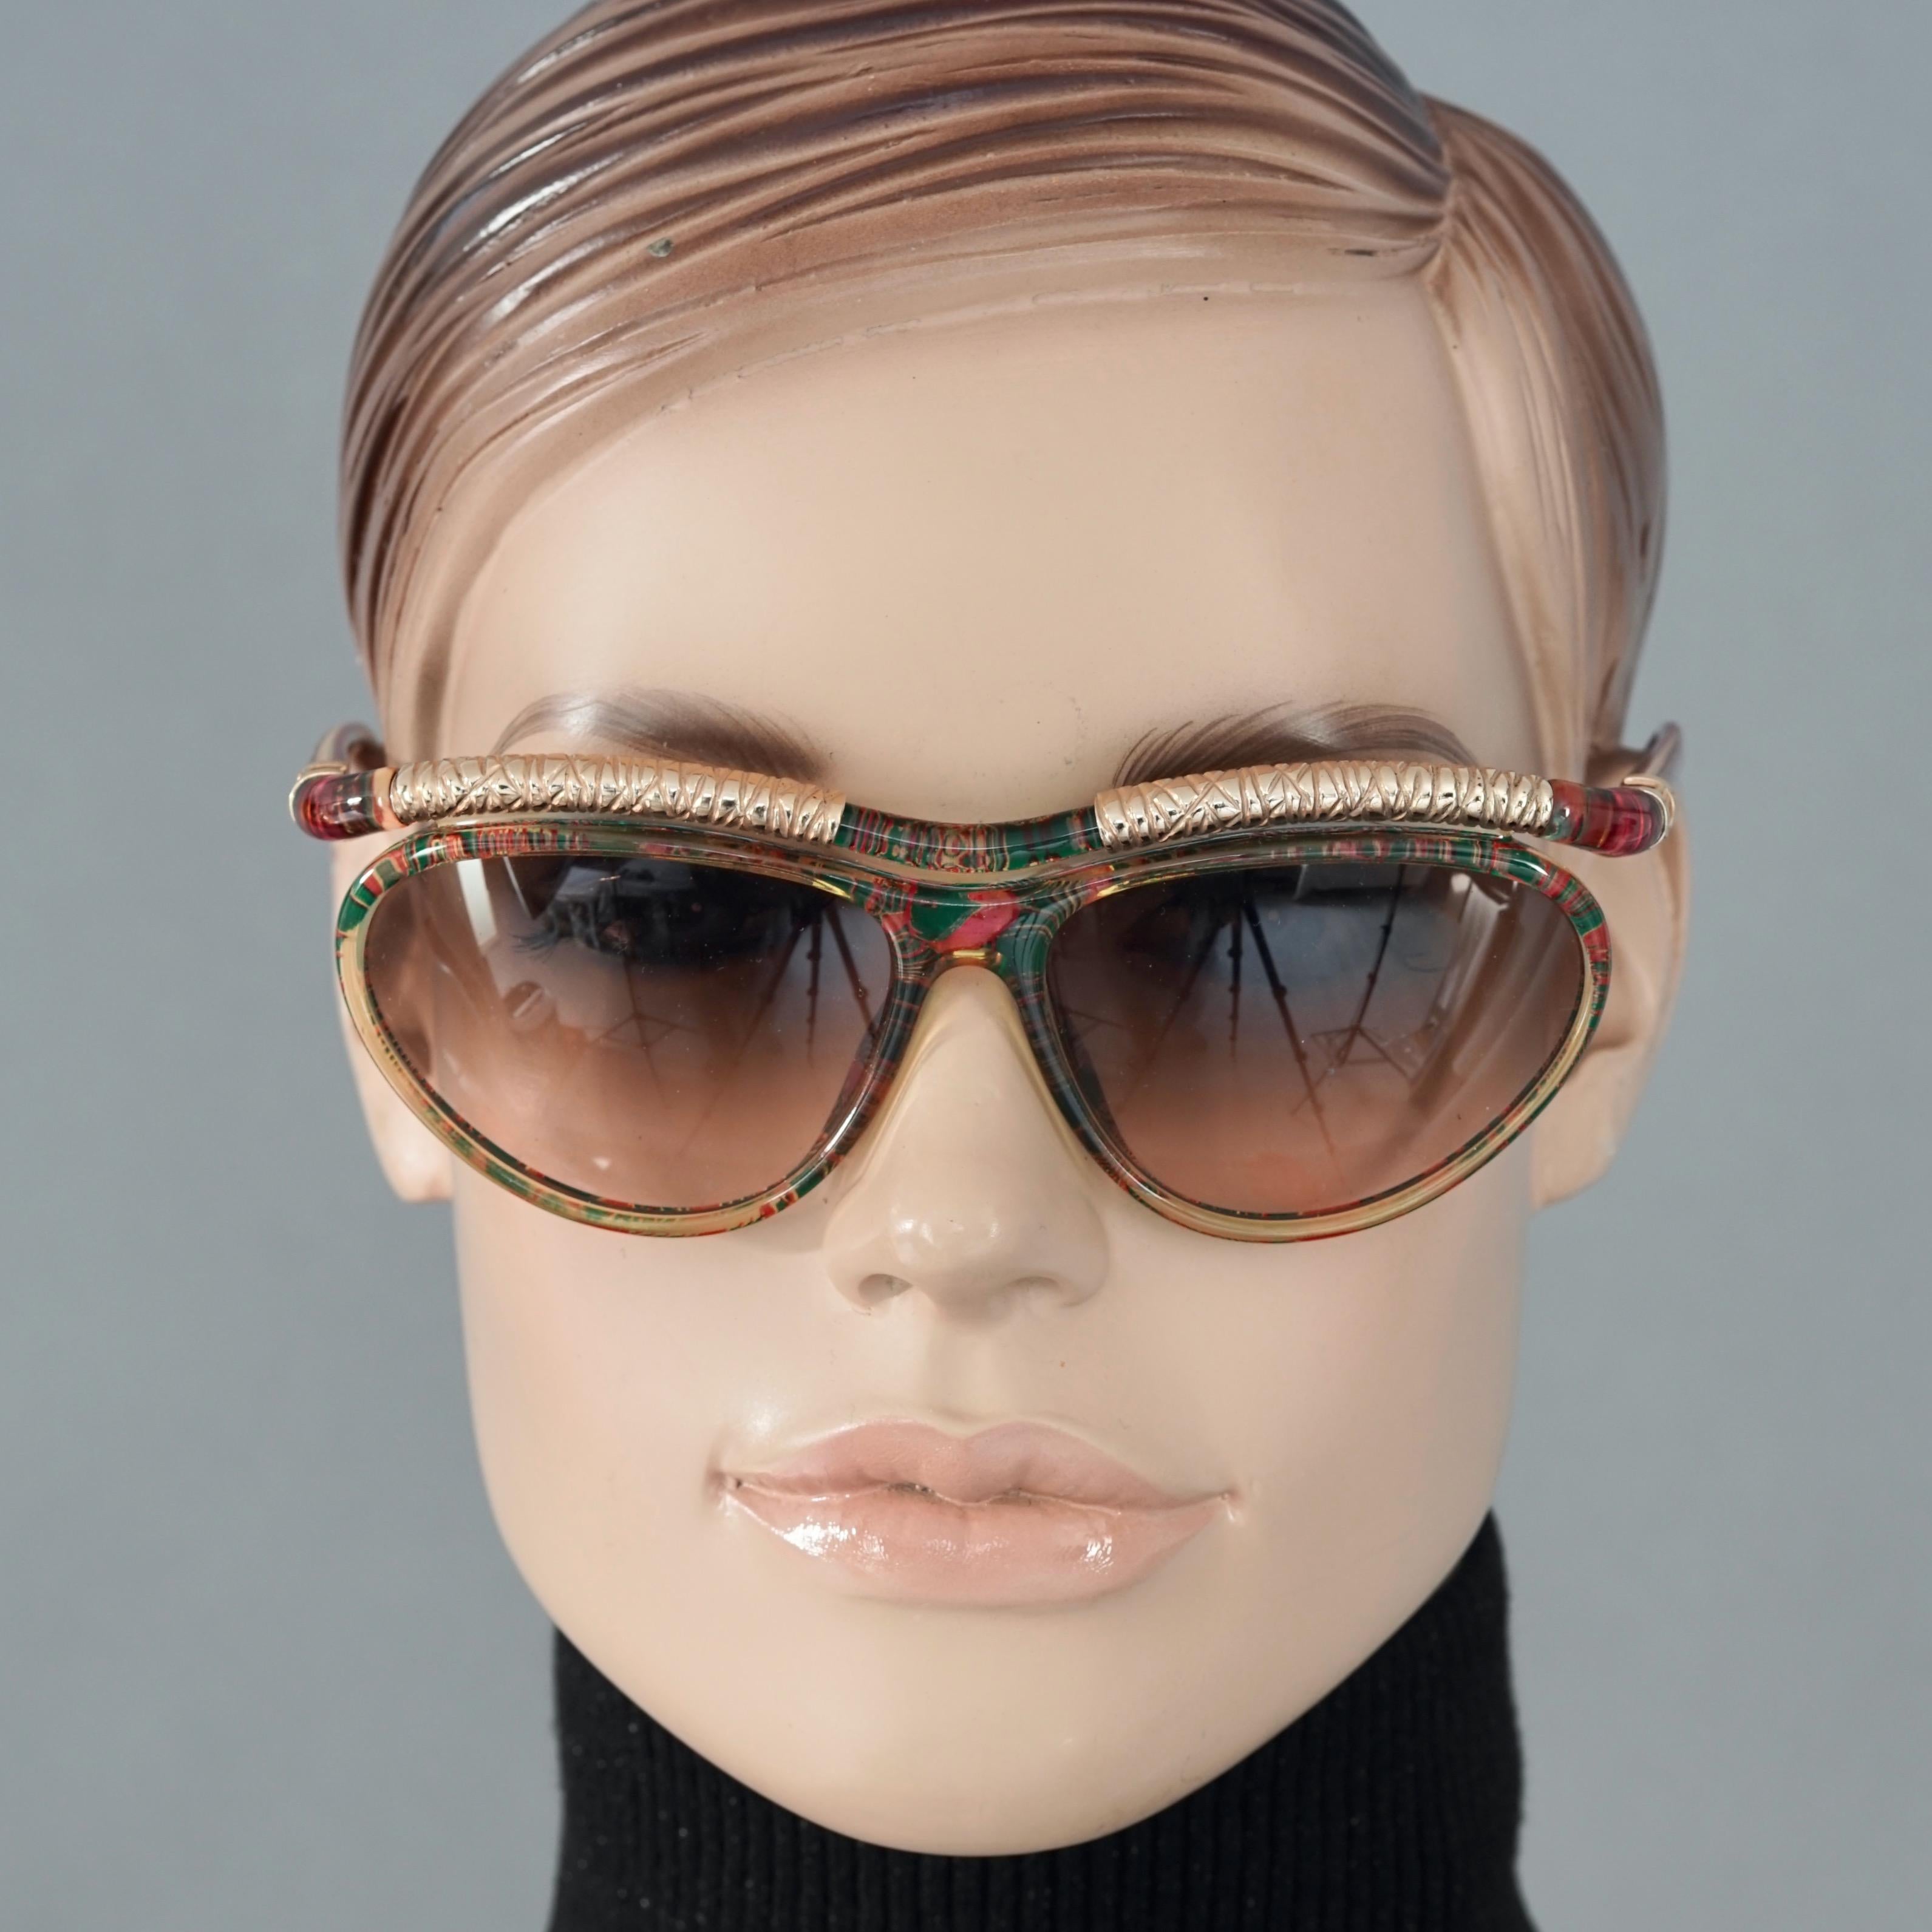 Vintage CHRISTIAN LACROIX Cat Eye Abstract Gilt Accent Sunglasses

Measurements:
Height: 2 inches (5.1 cm)
Horizontal Width: 5.51 inches (14 cm)
Arms: 4.72 inches (12 cm)

Features:
- 100% Authentic CHRISTIAN LACROIX. 
- Cat eye with red and green